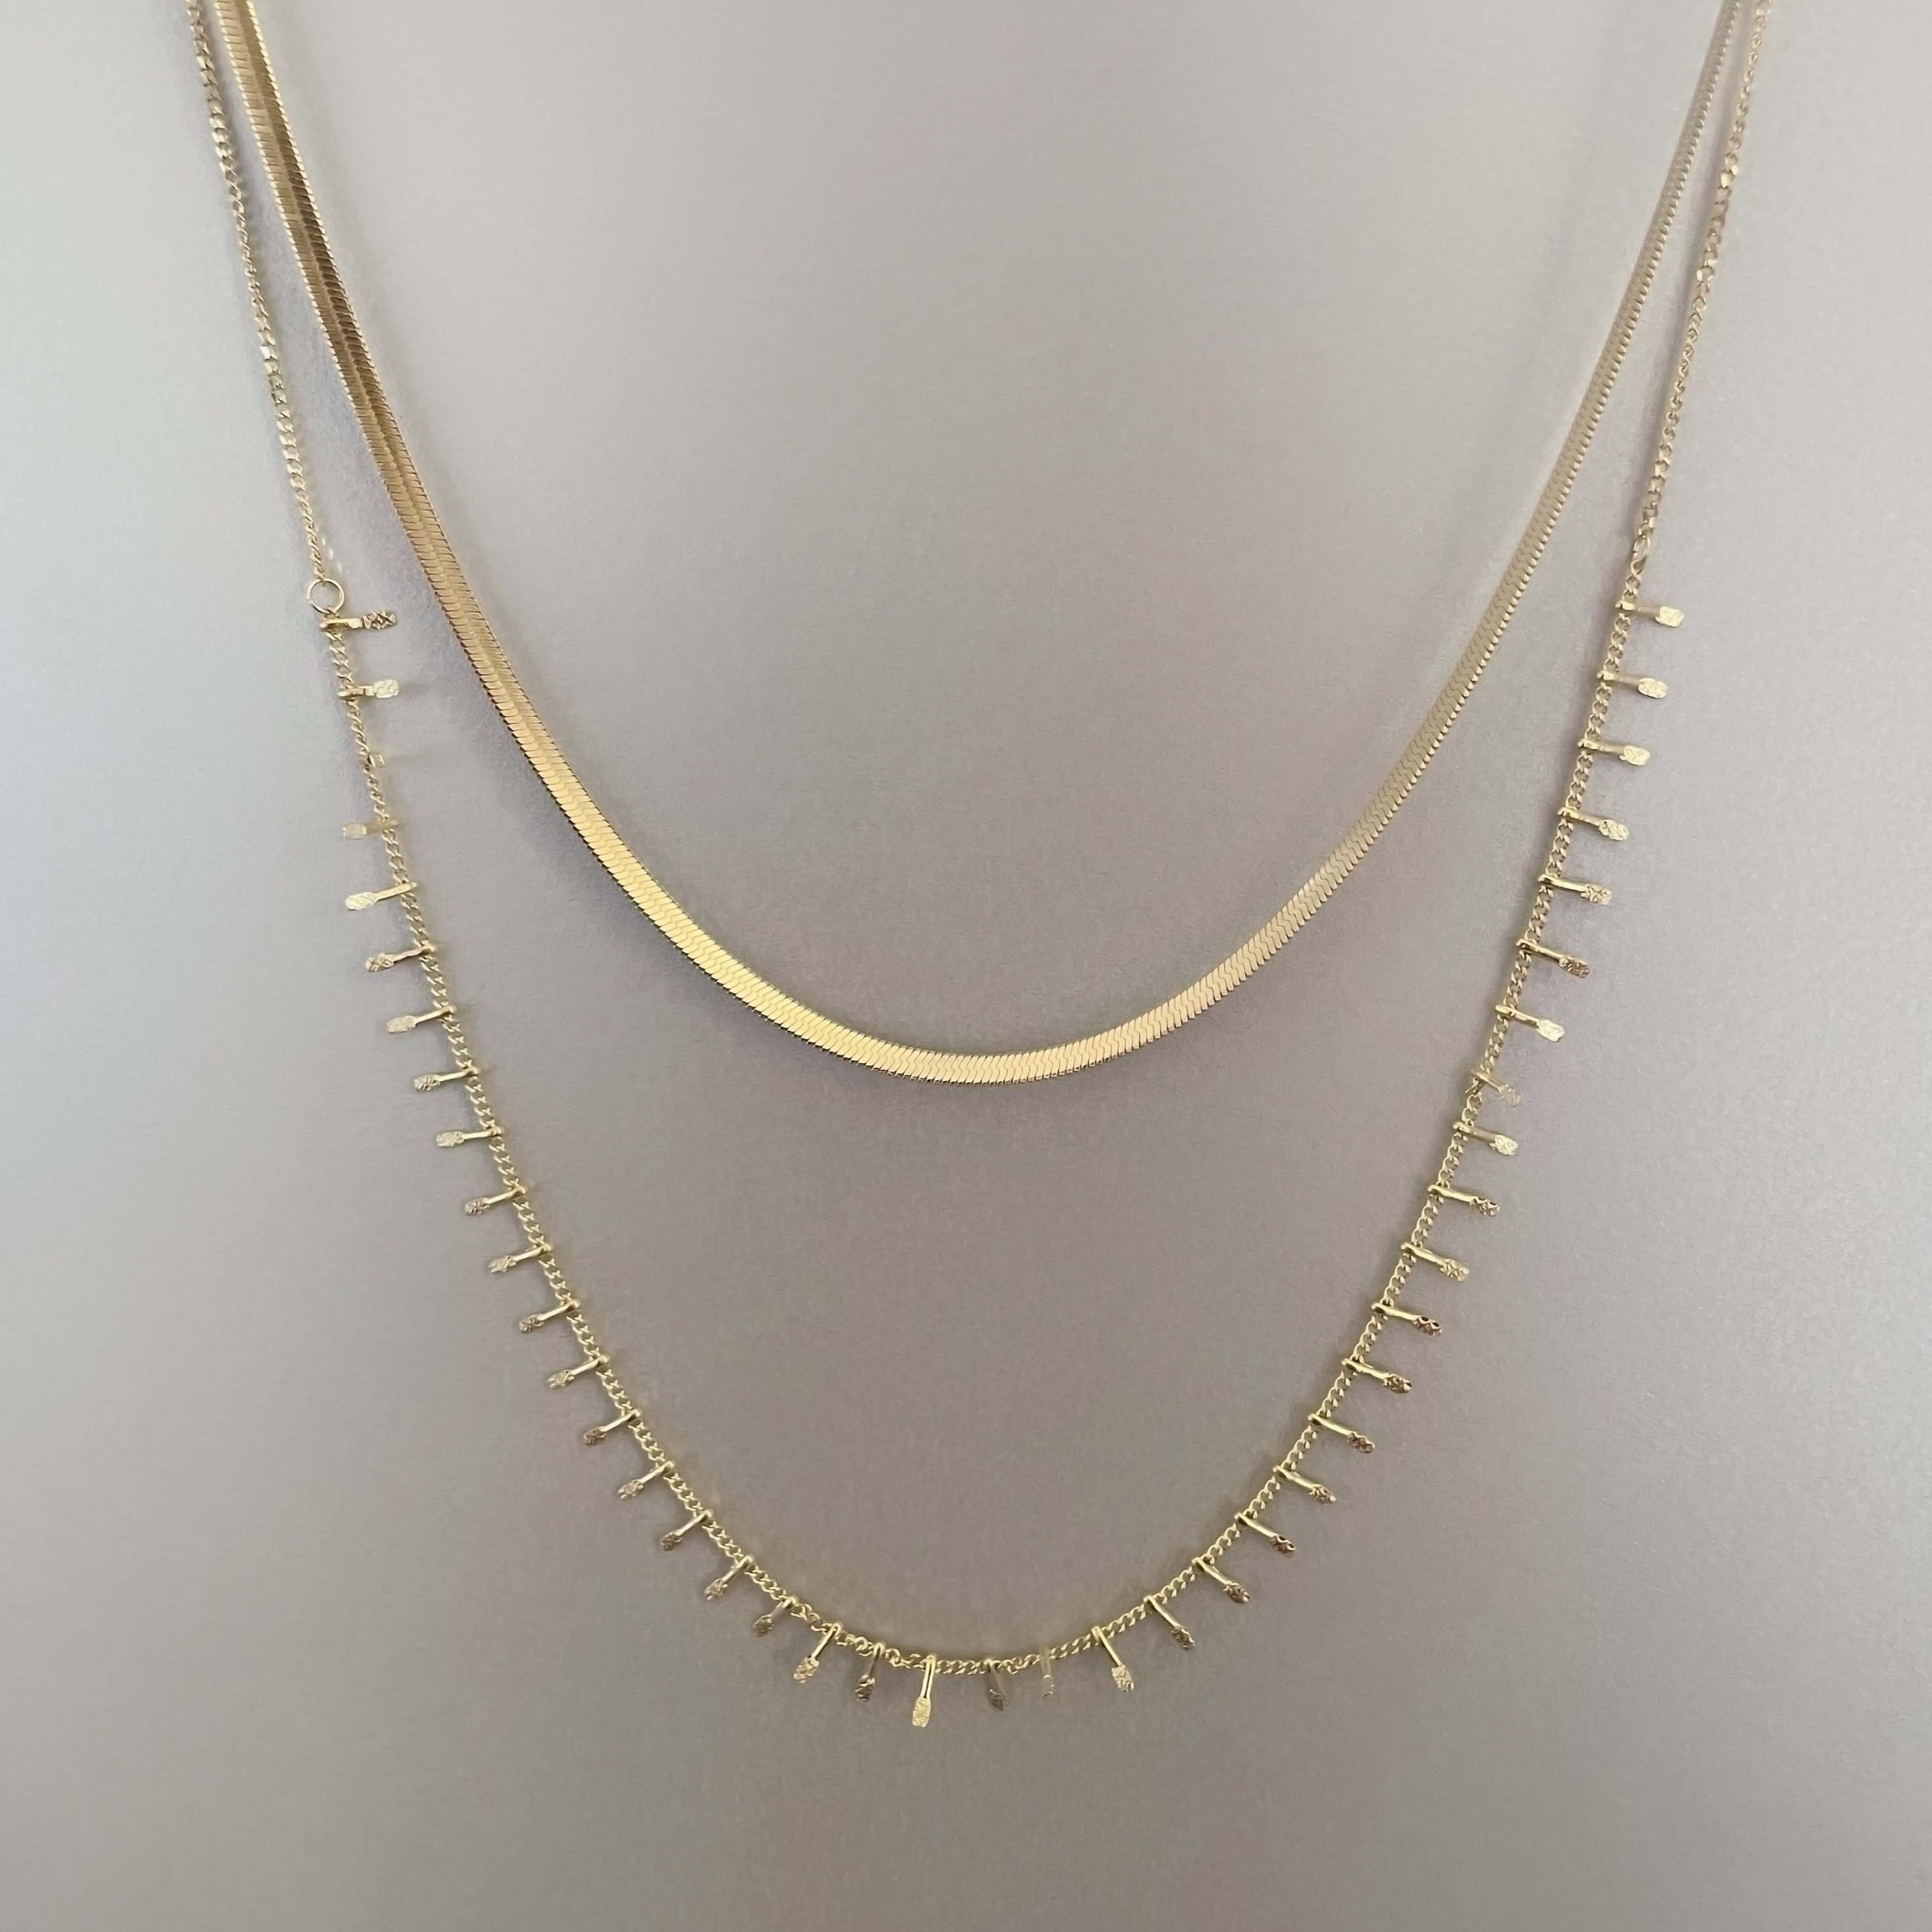 Elisaria Luxe 18k Gold Plated Layered Necklace